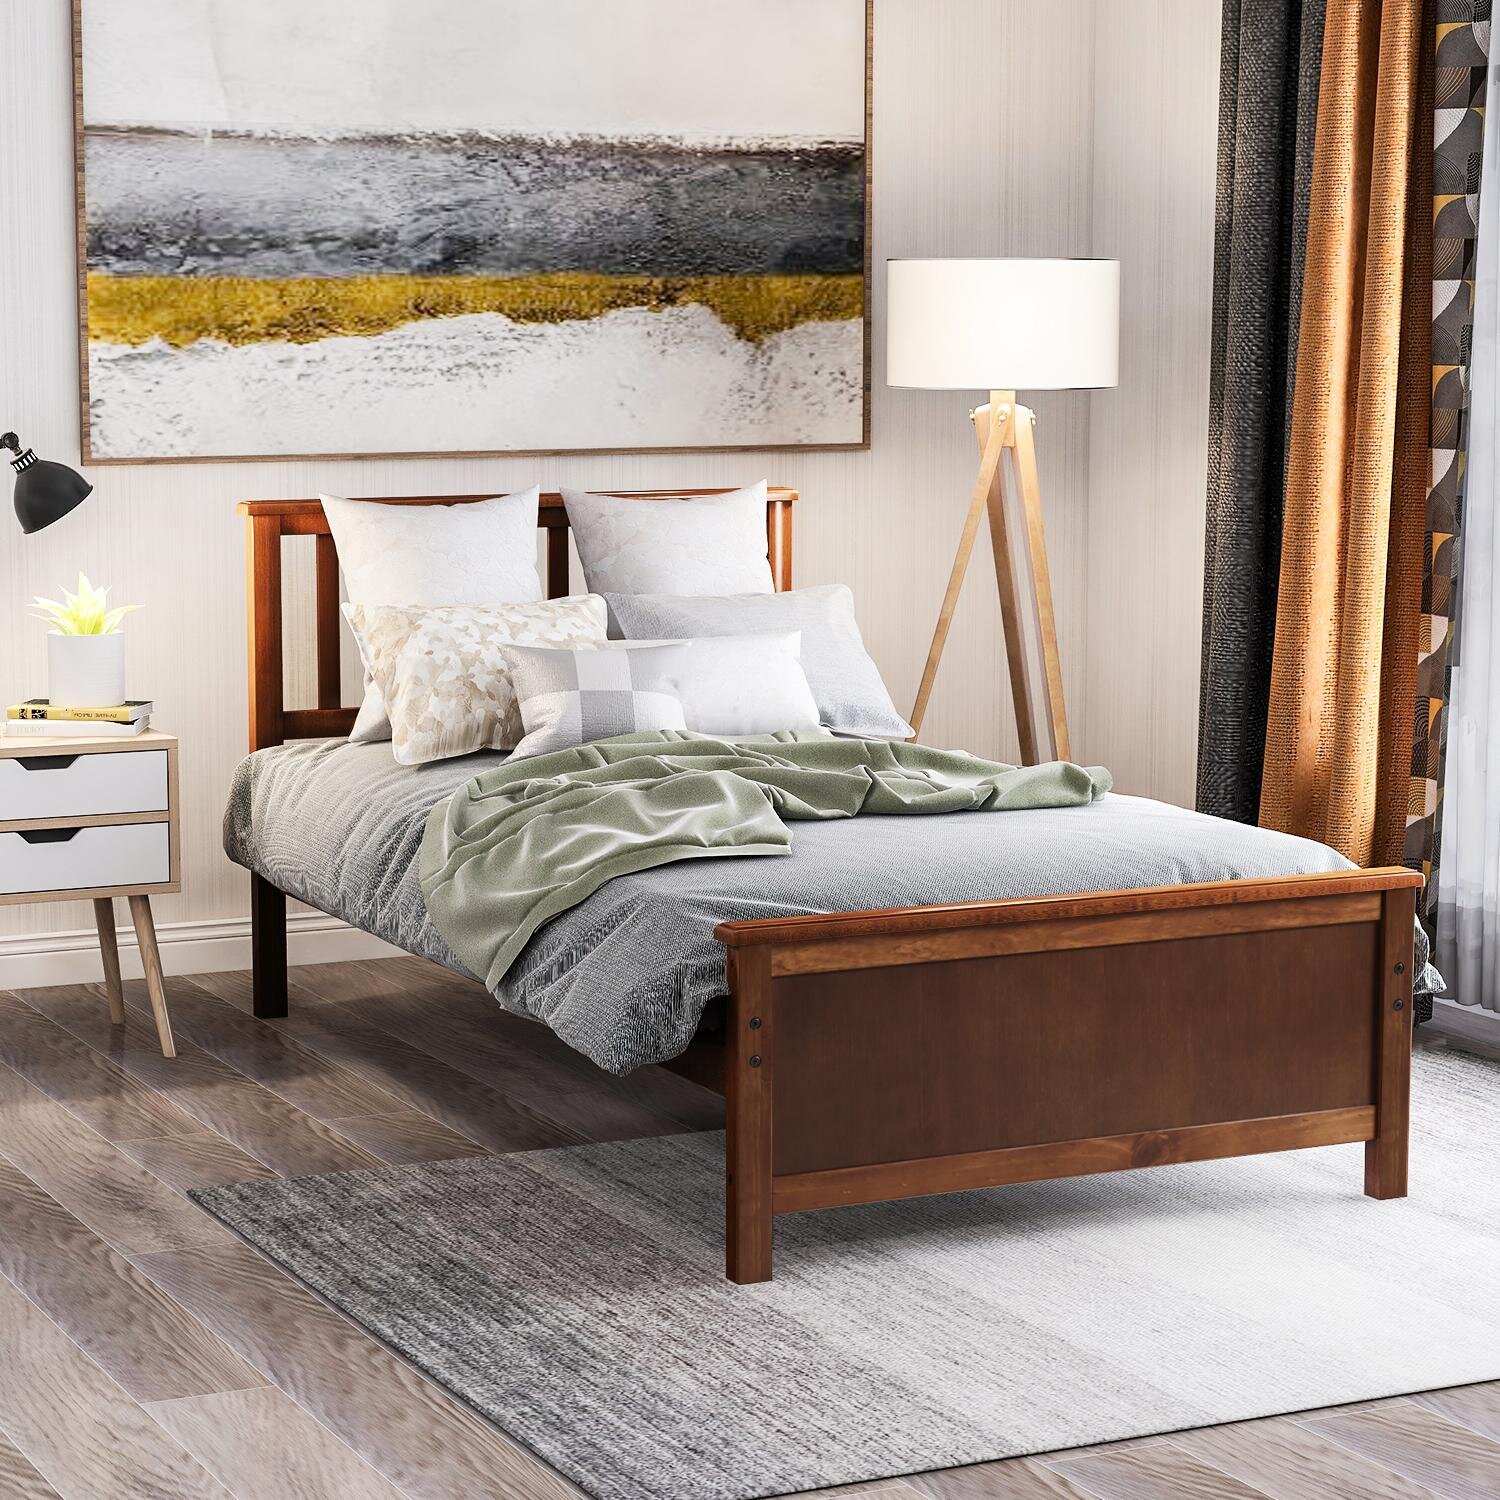 Beig Details about   Contemporary Platform Bed Frame with Headboard and Wooden Slats Full Size 